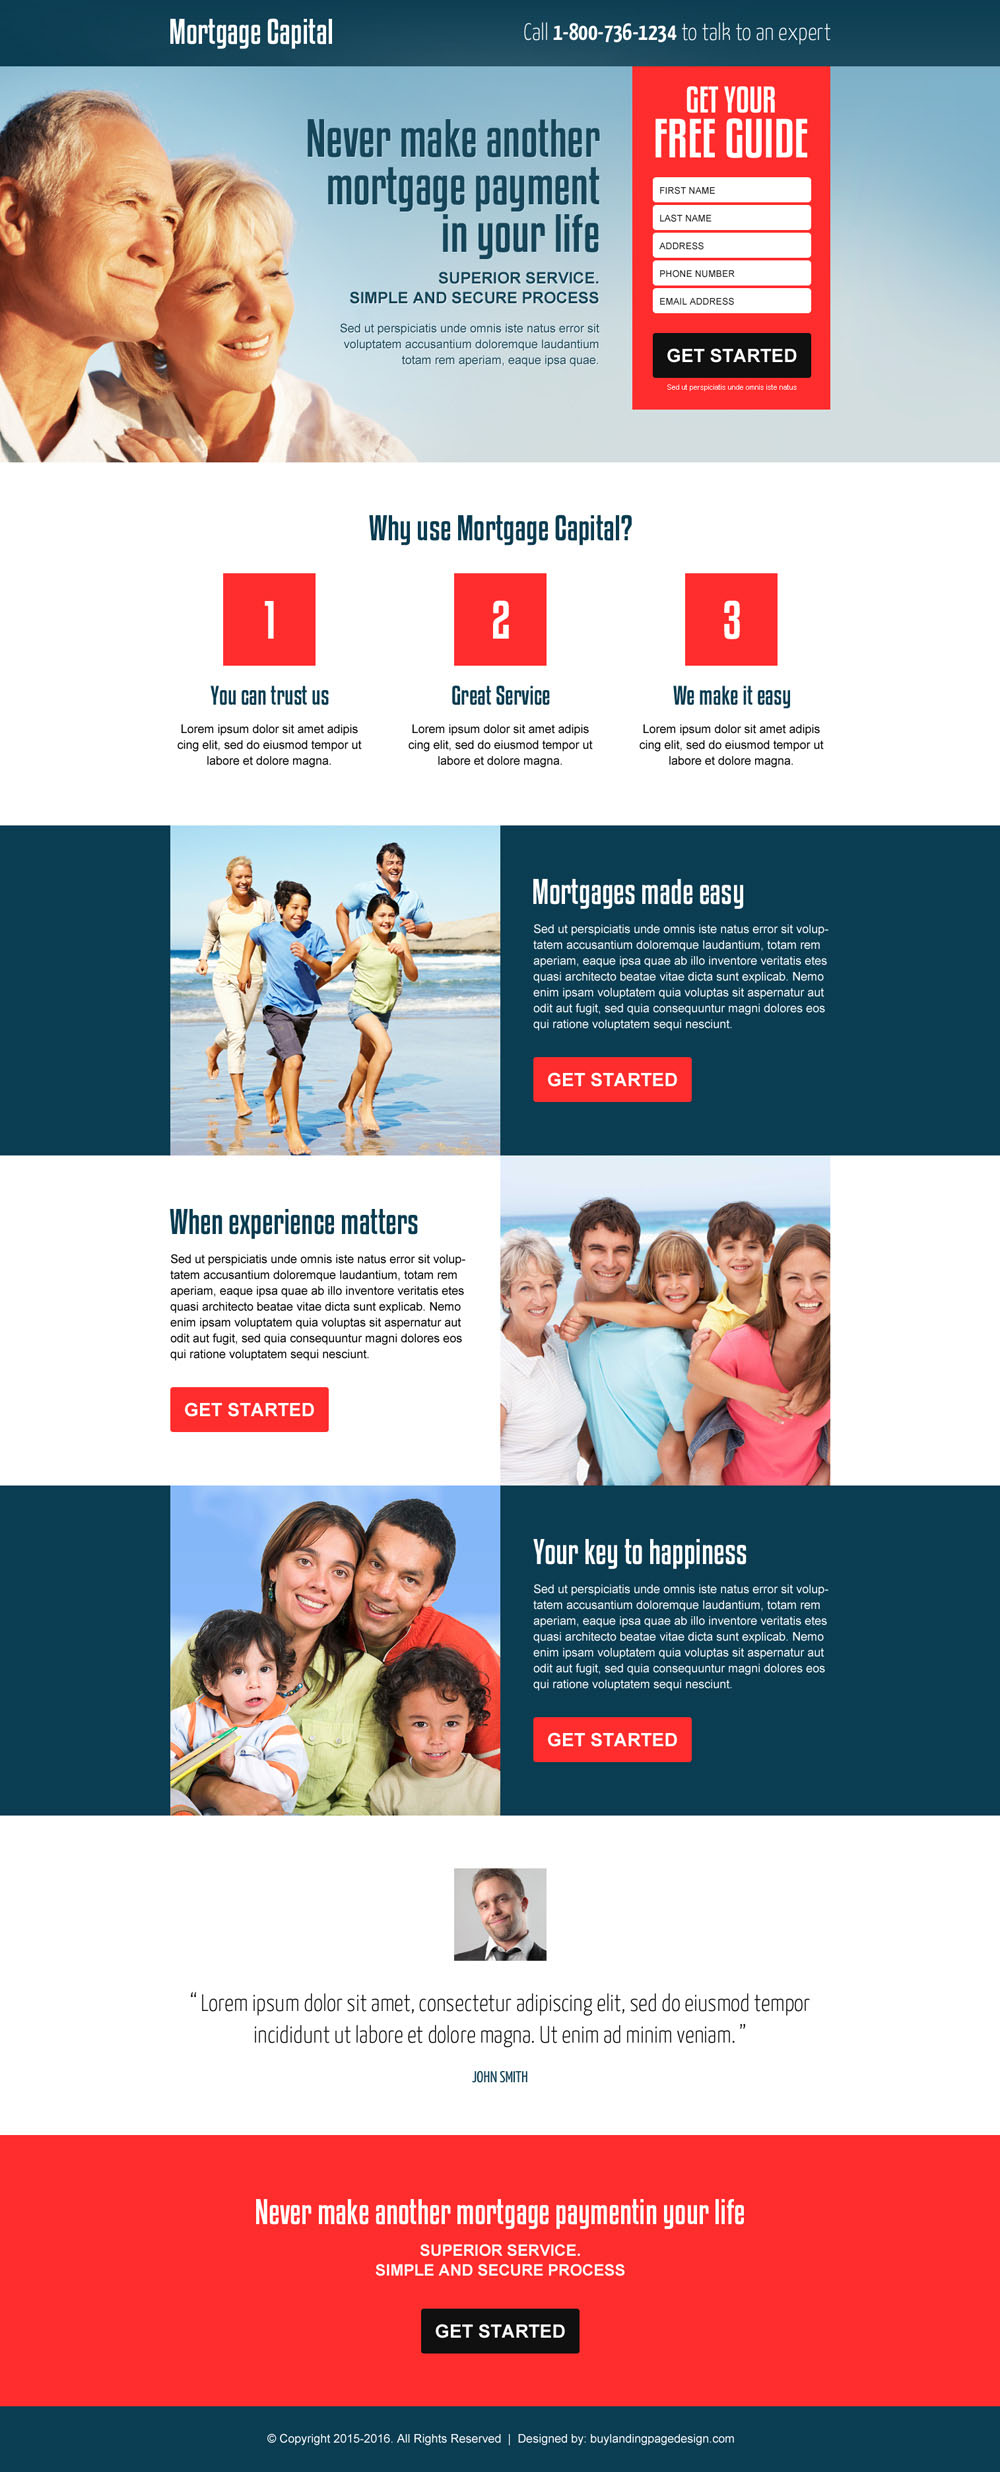 best-mortgage-business-service-free-quote-lead-generation-converting-responsive-landing-page-design-003